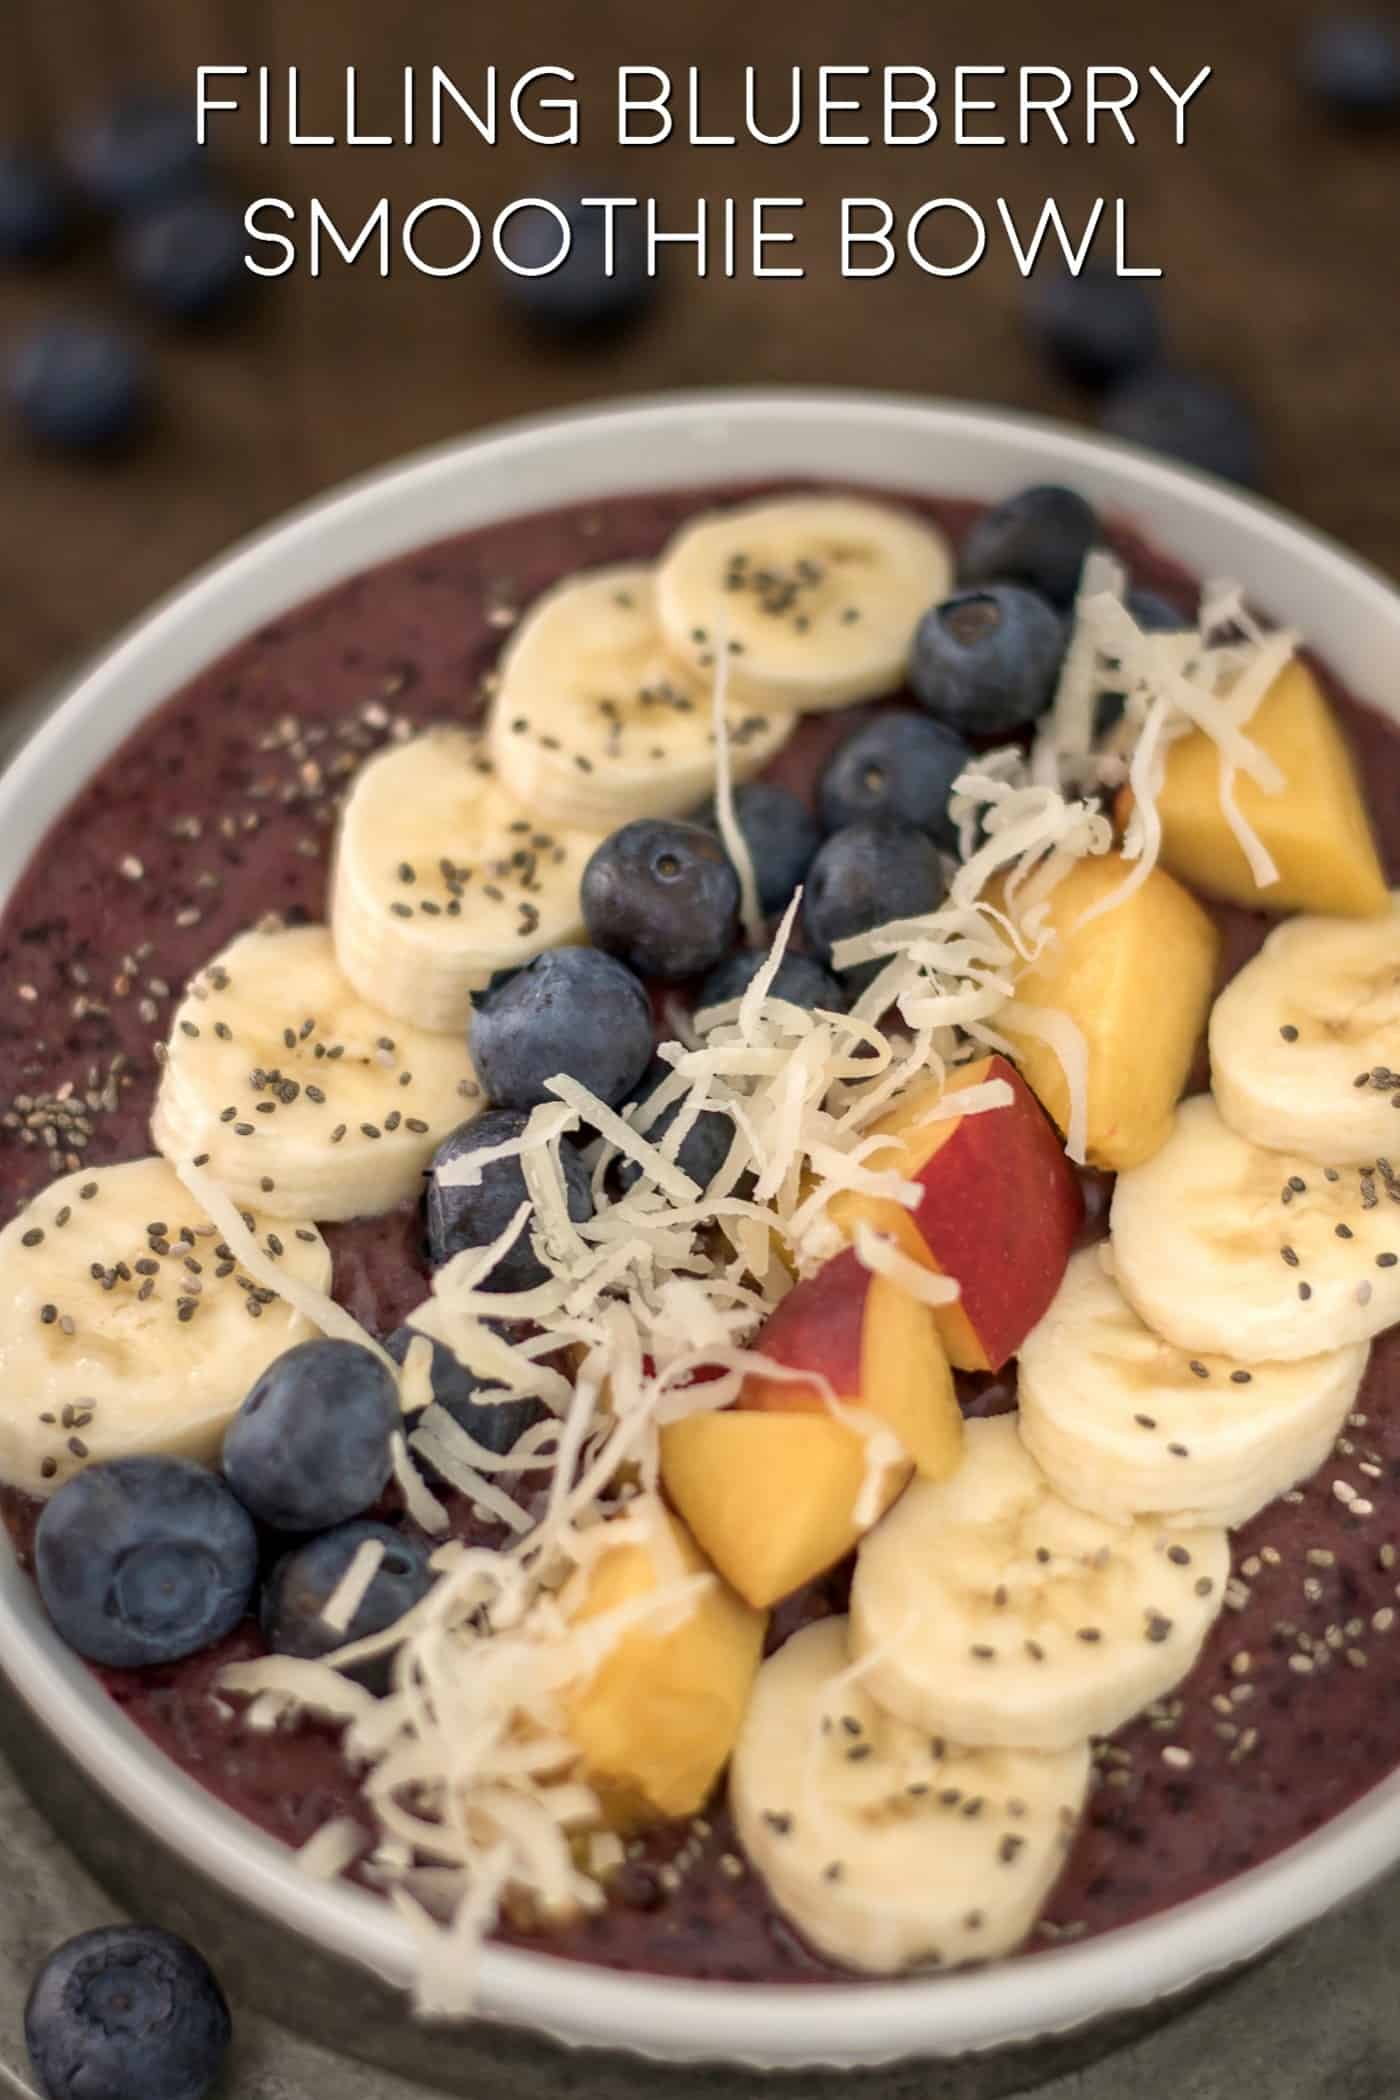 If you wish you could eat ice cream for breakfast, you'll love a smoothie bowl! It's healthy and filling with delicious fresh fruits. Nom nom!